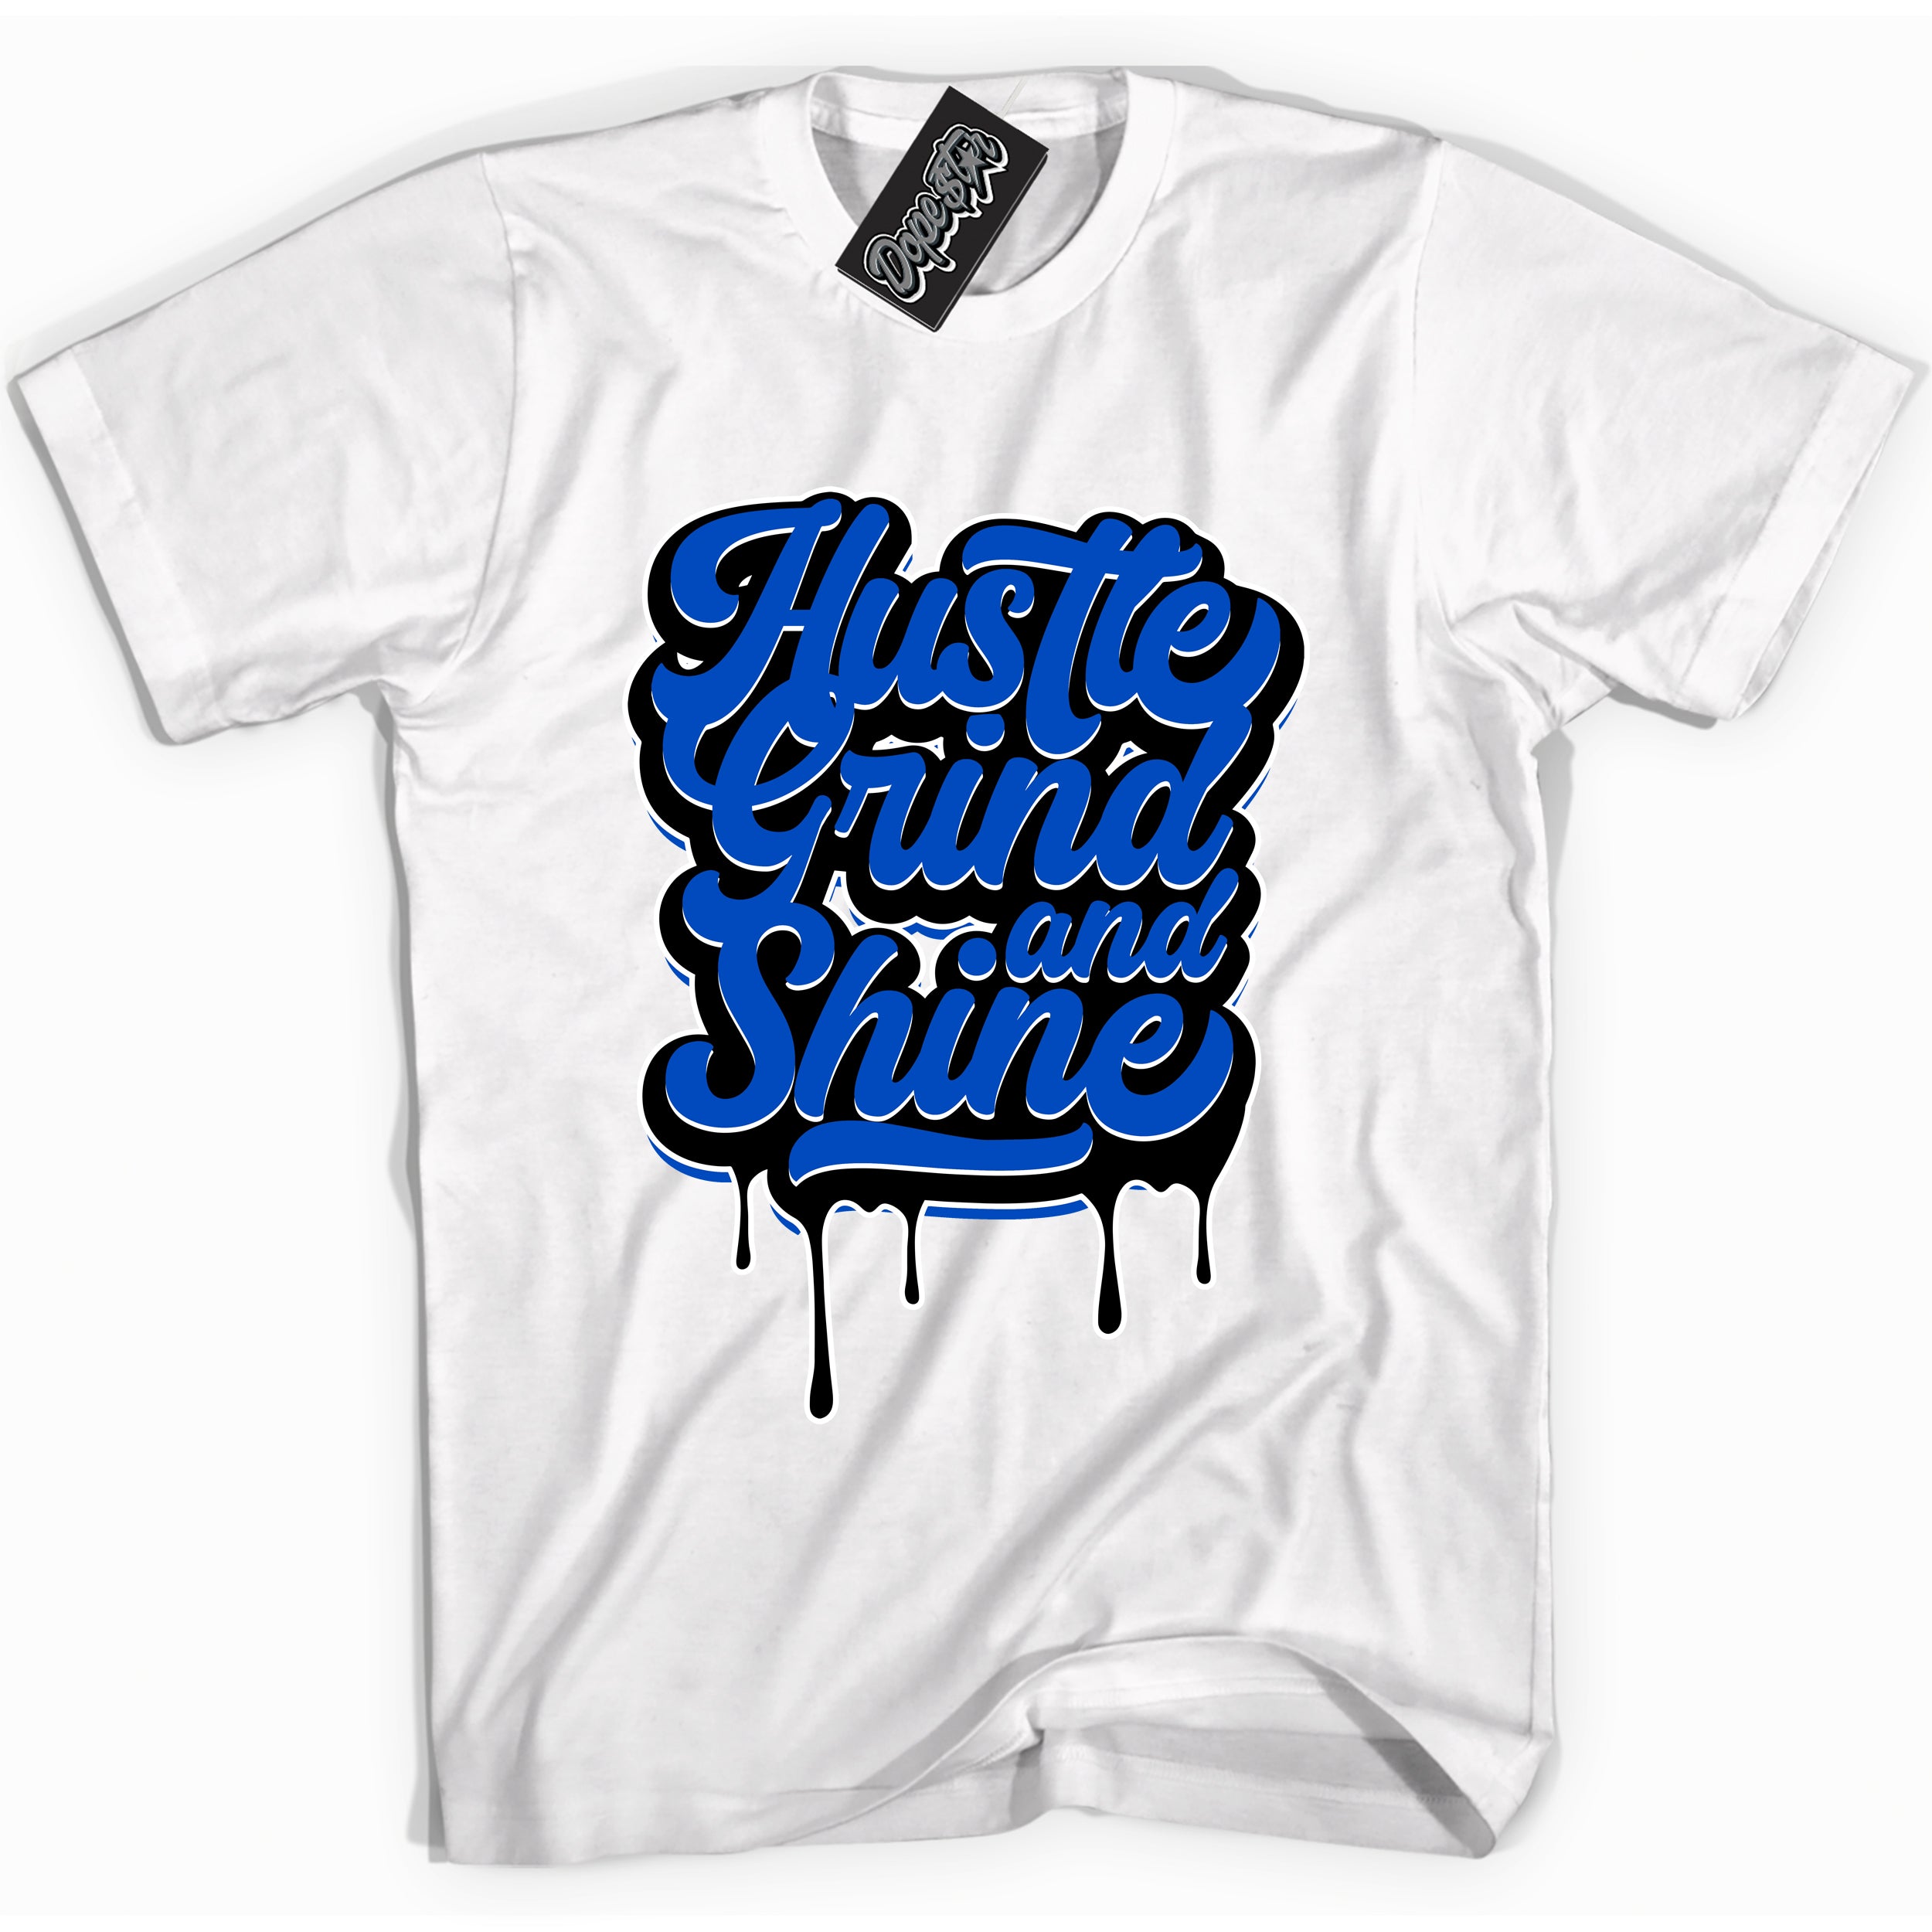 Cool White graphic tee with Hustle Grind and Shine design, that perfectly matches Royal Reimagined 1s sneakers 